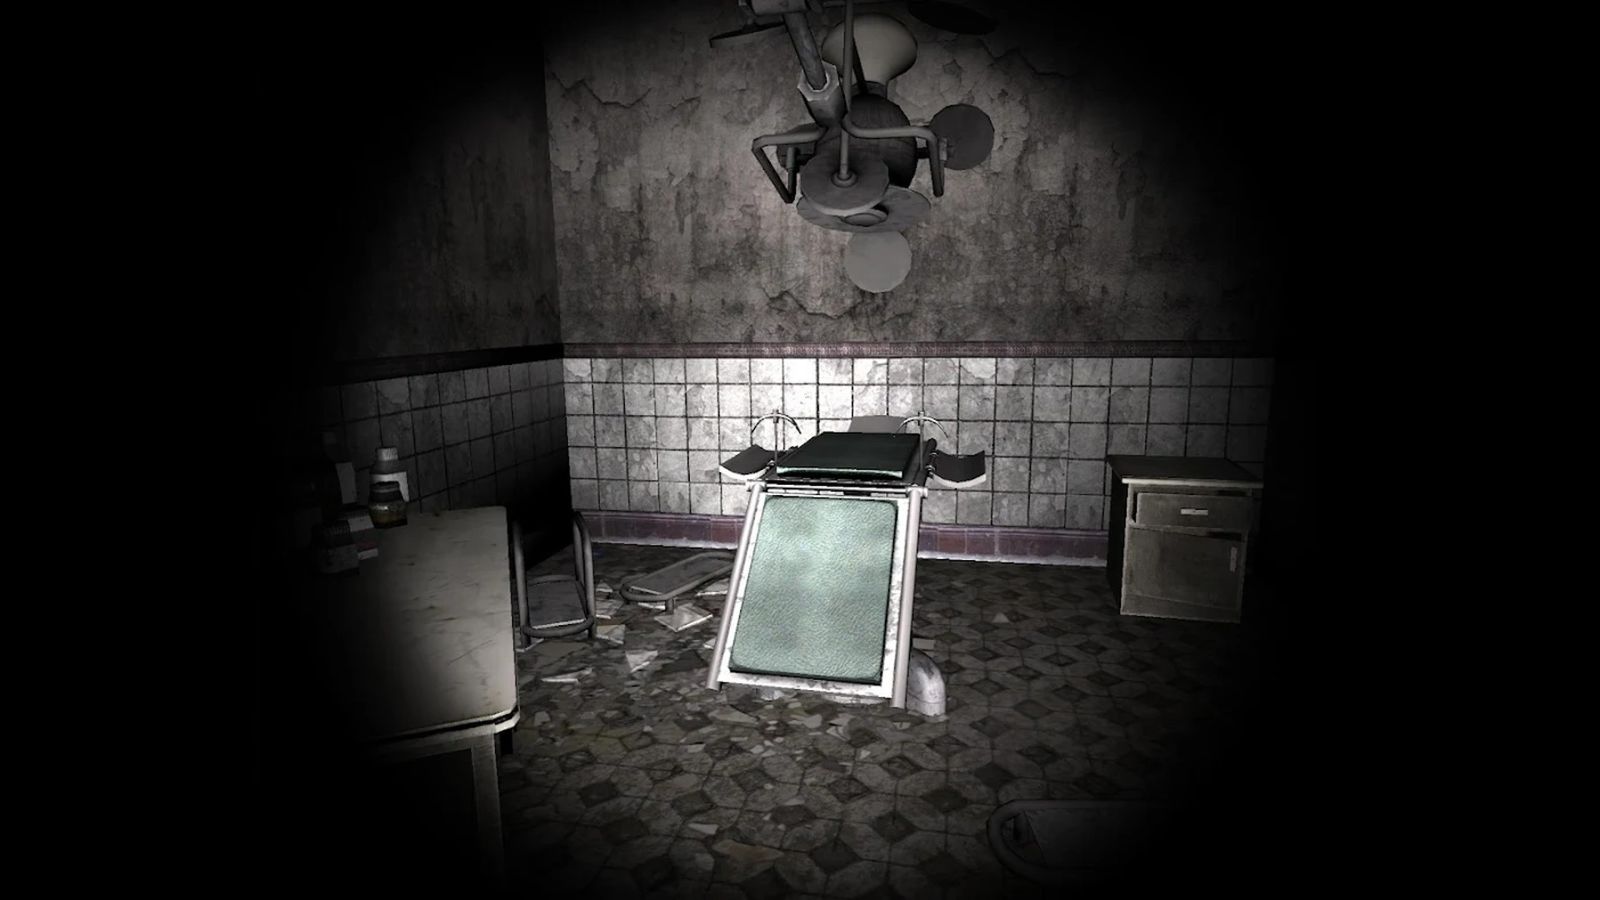 Screenshot from The Ghost, showing an abandoned asylum lit only by a flashlight